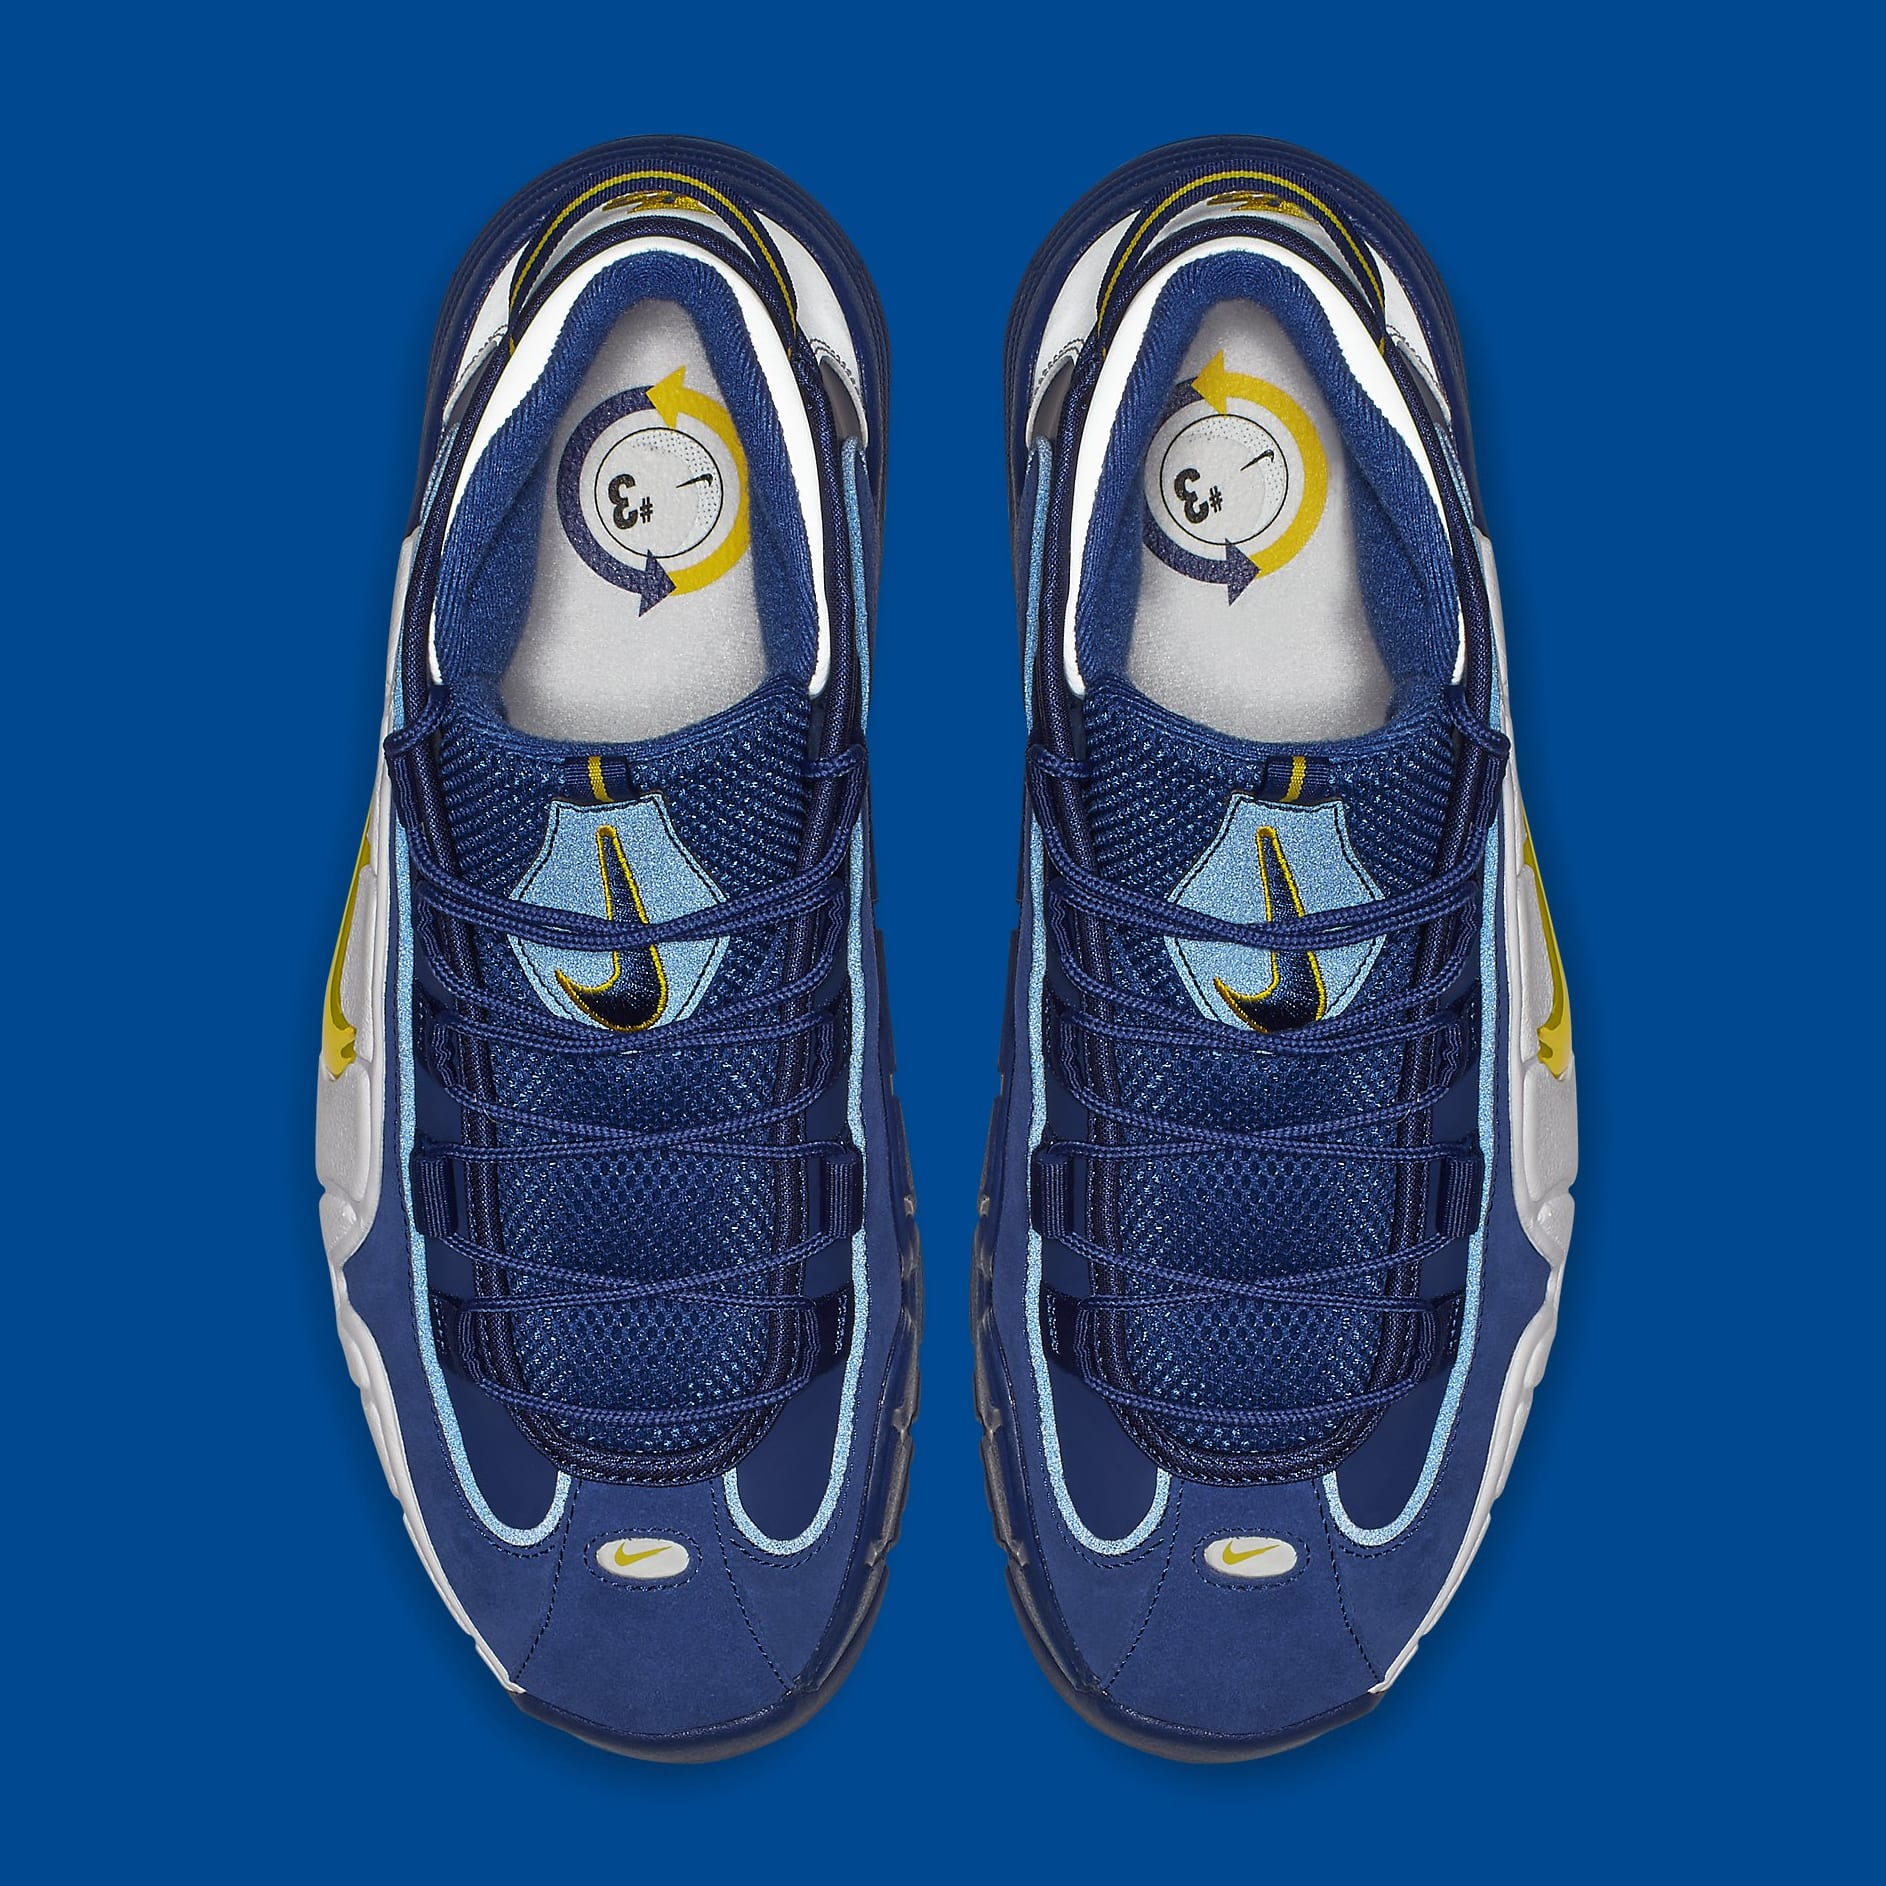 Nike Air Max Penny 1 Warriors Release Date 685153-401 Top